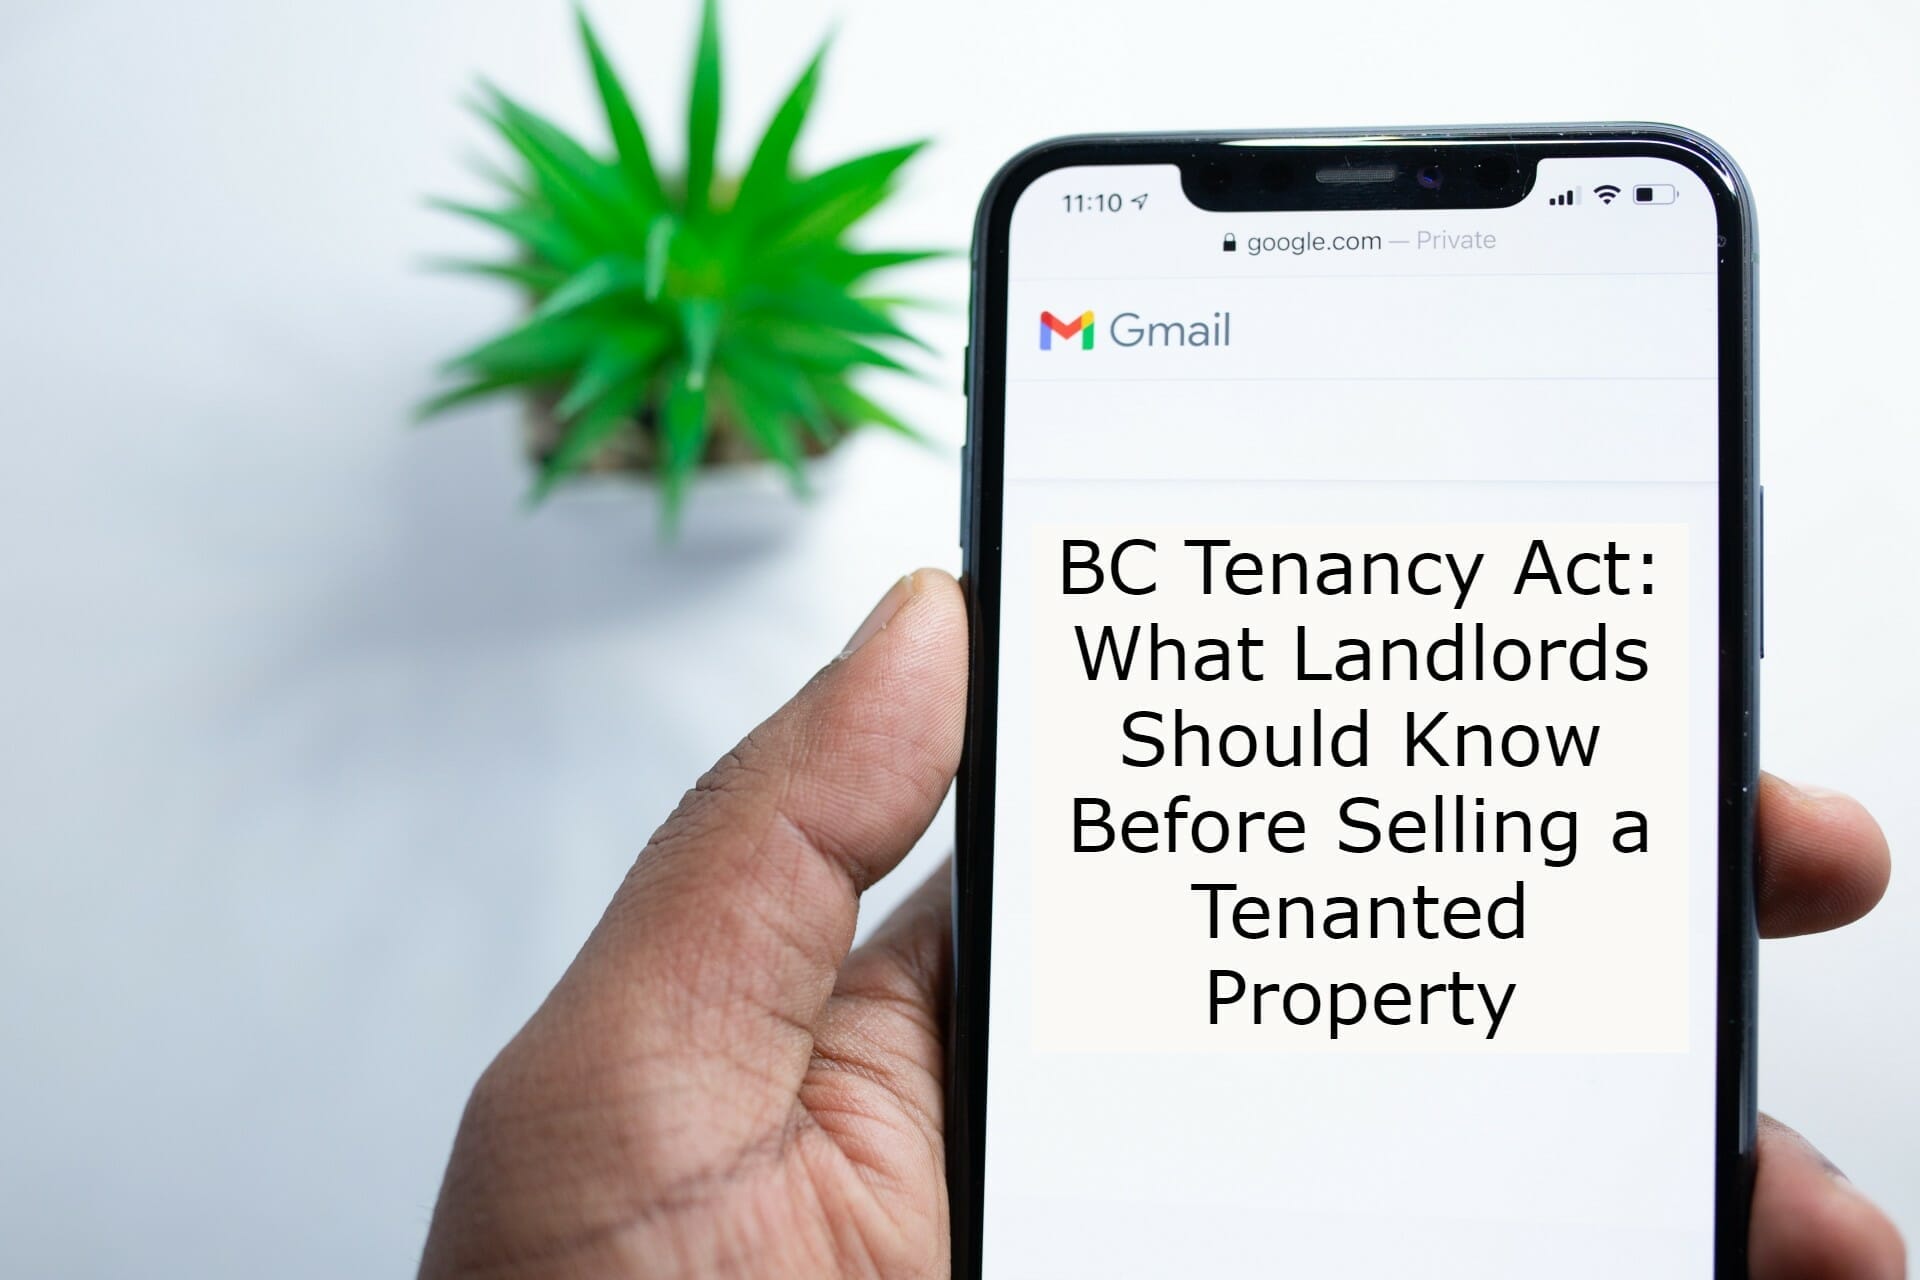 bc-tenancy-act-what-landlords-should-know-before-selling-a-tenanted